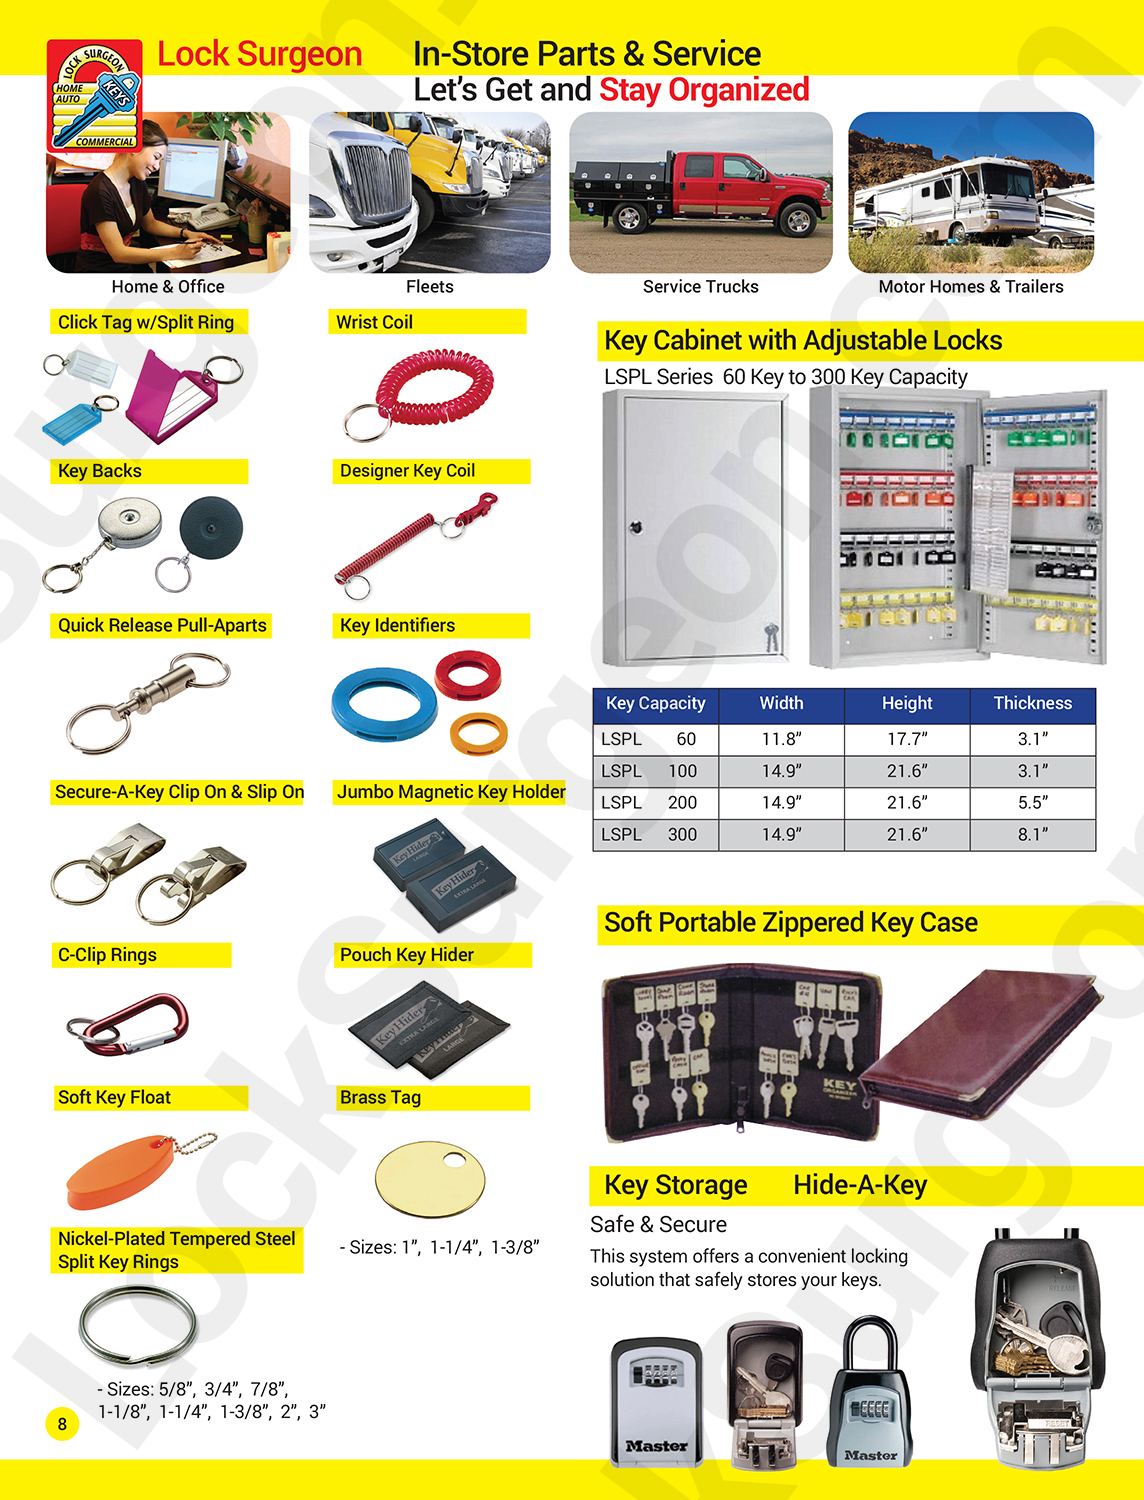 Lock Surgeon carry a variety of key organizational products click tags wrist coils key identifiers.